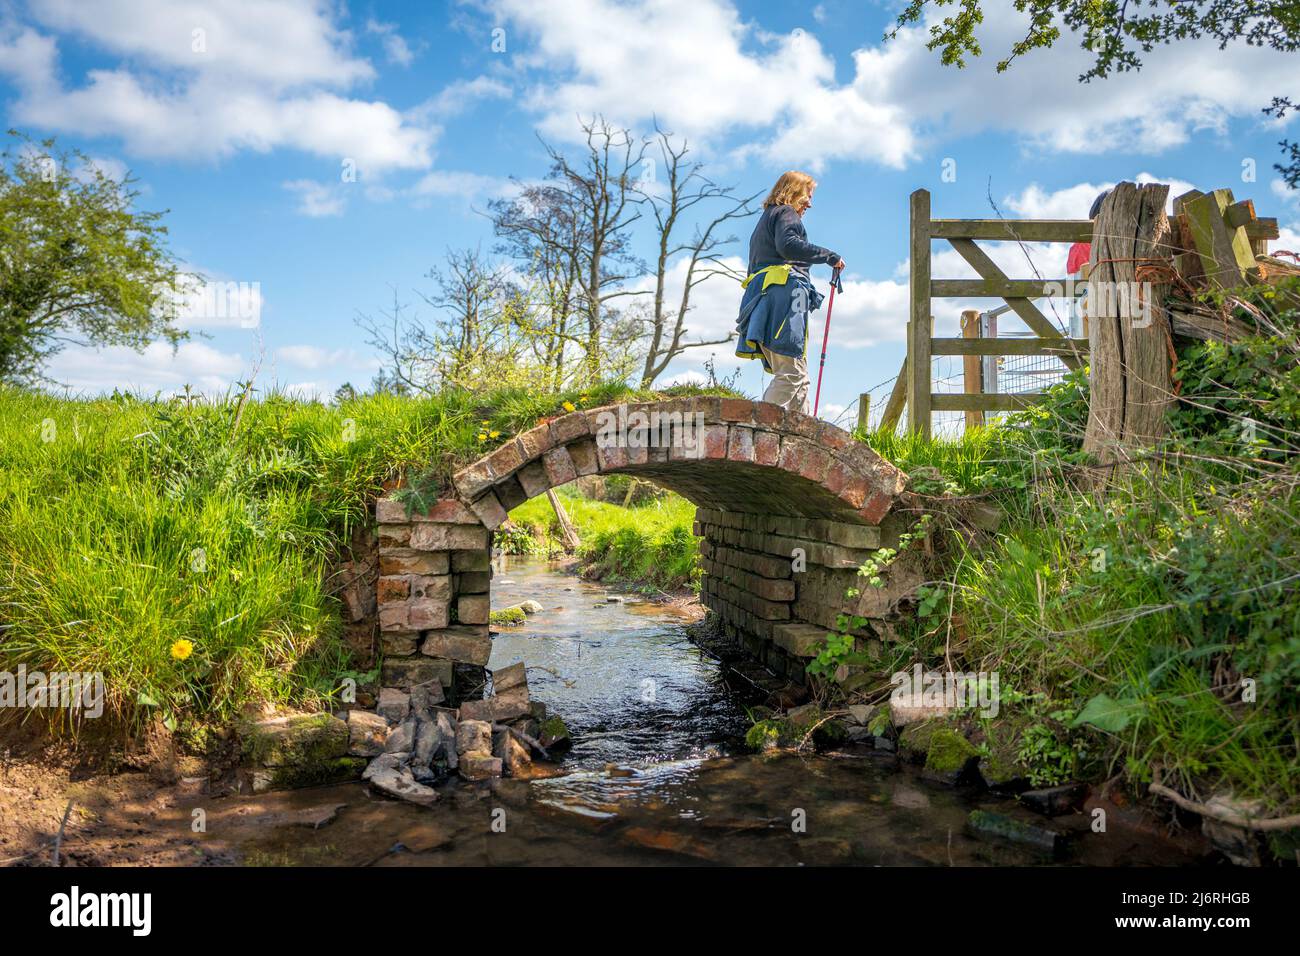 Female walker walking over an old decaying single span foot bridge crossing a small stream or river. Stock Photo